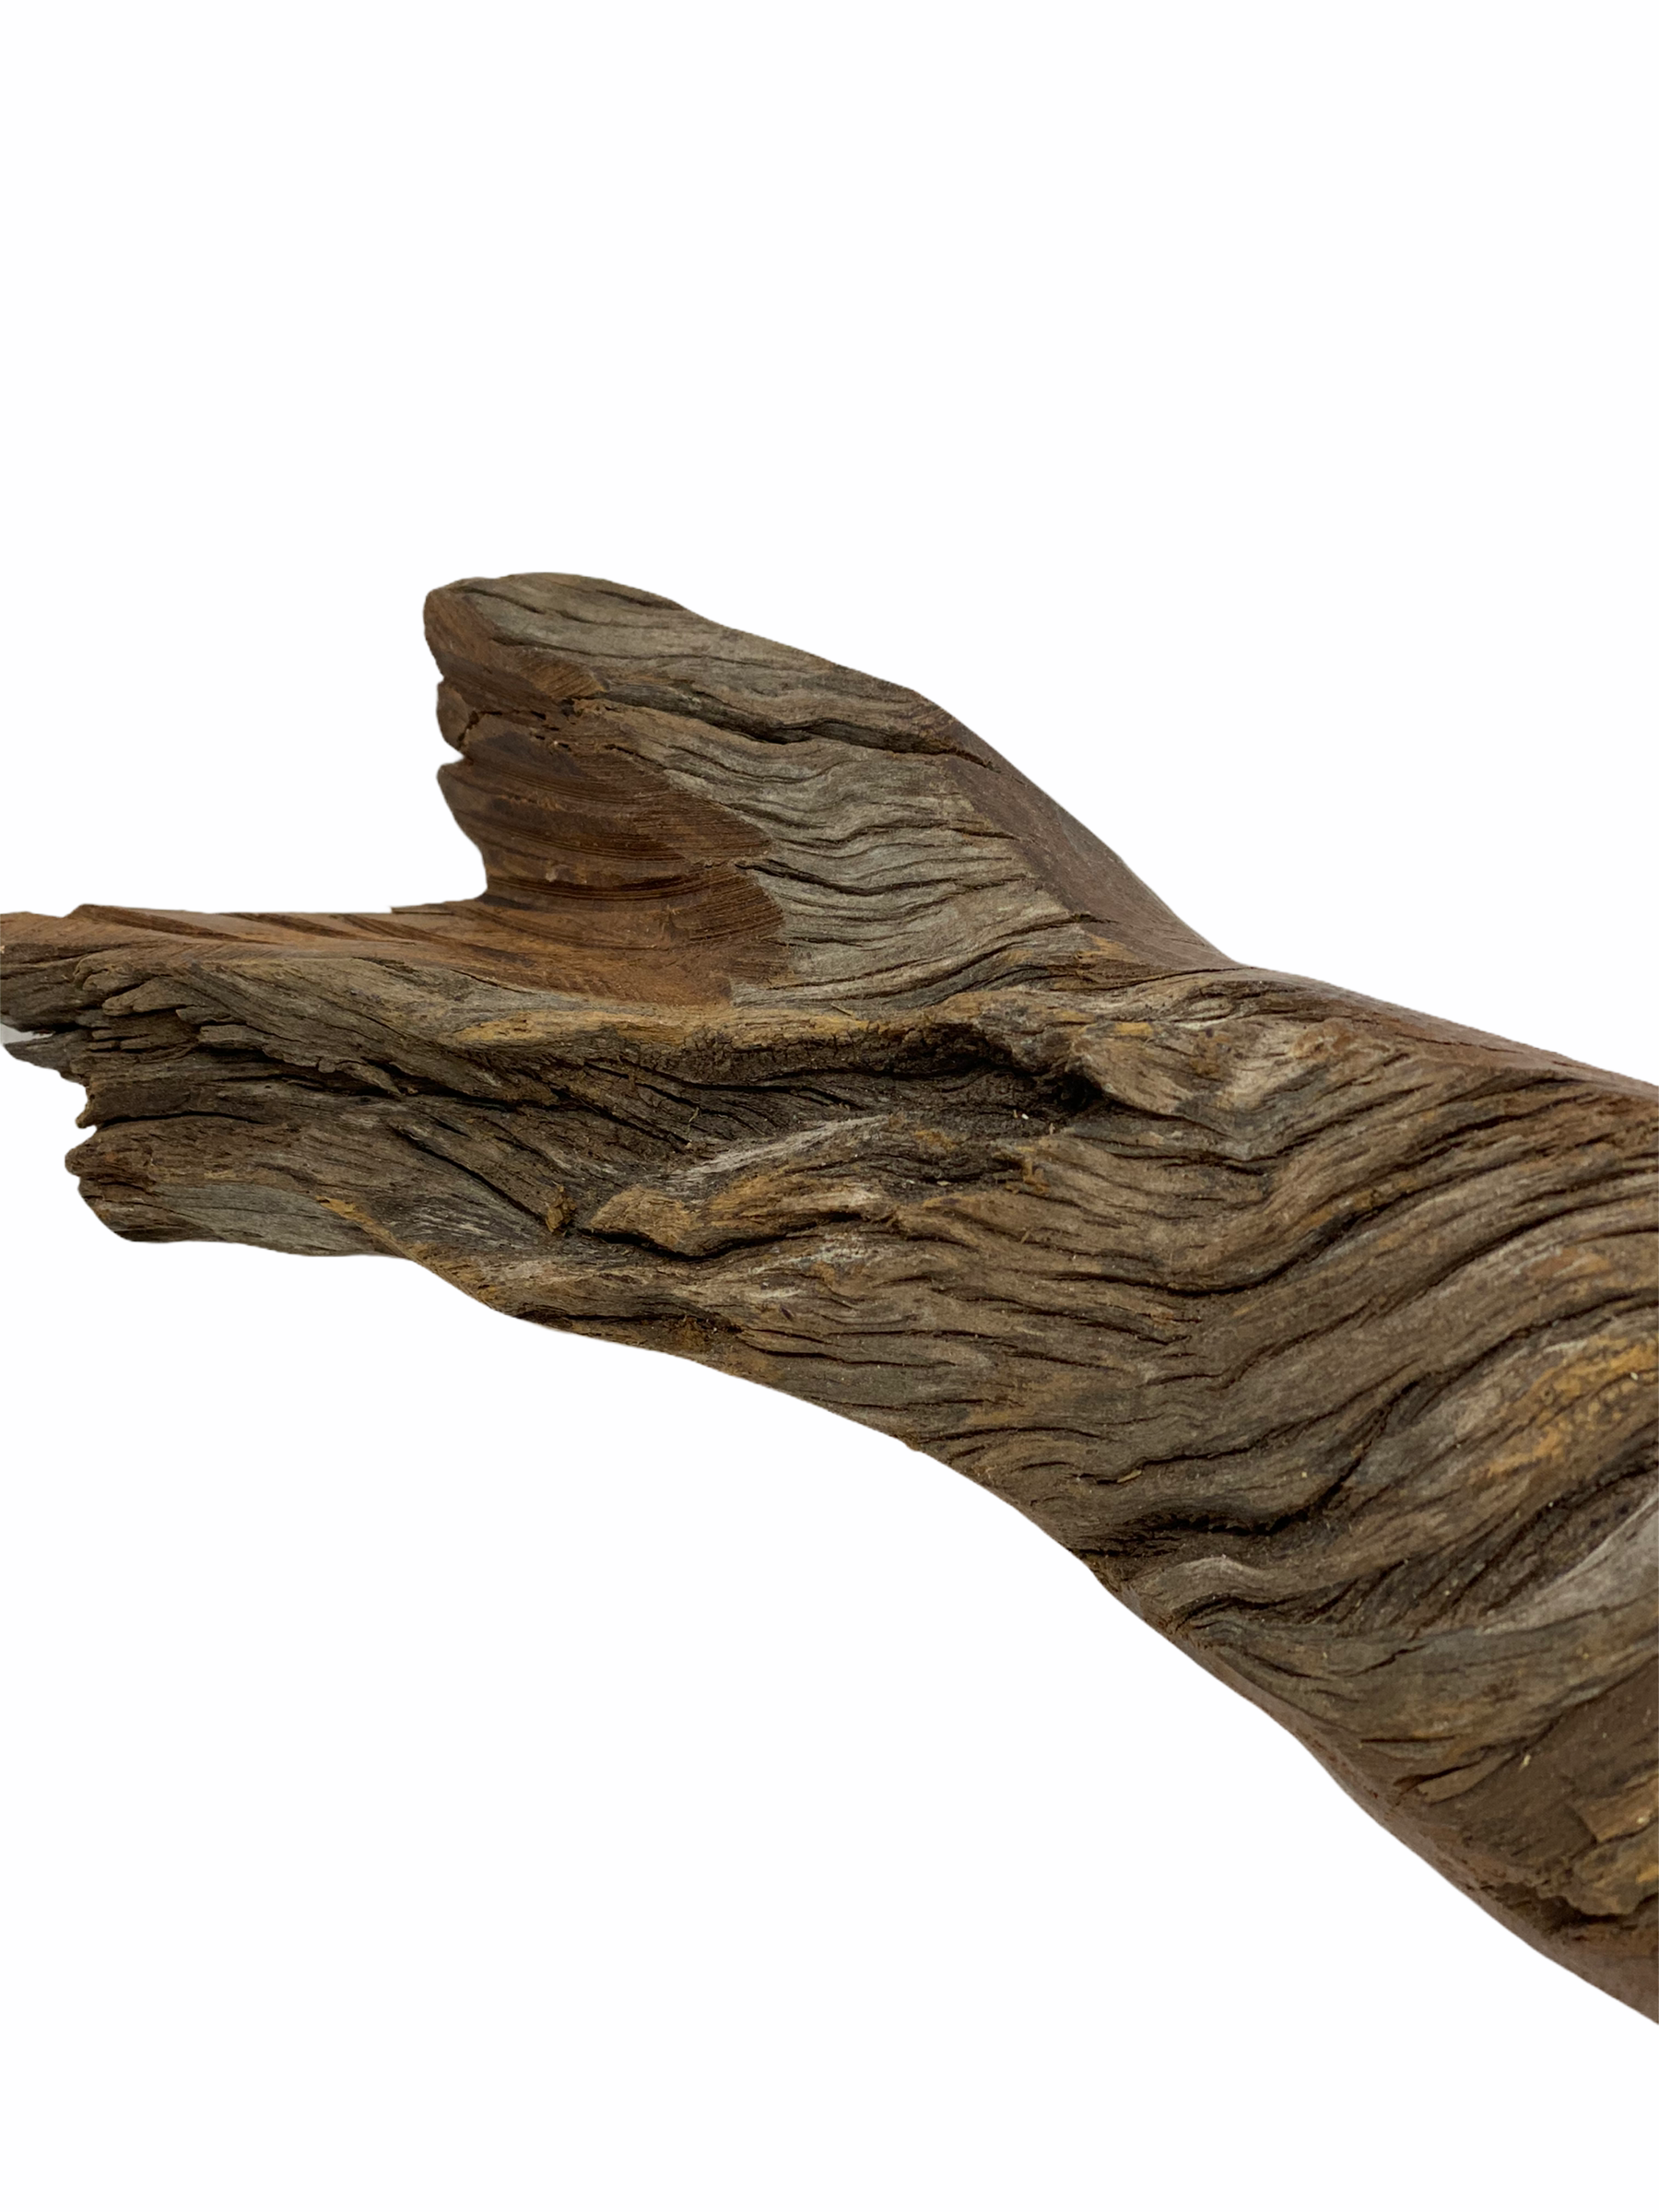 Drift Wood Hand Carved Fish - Large